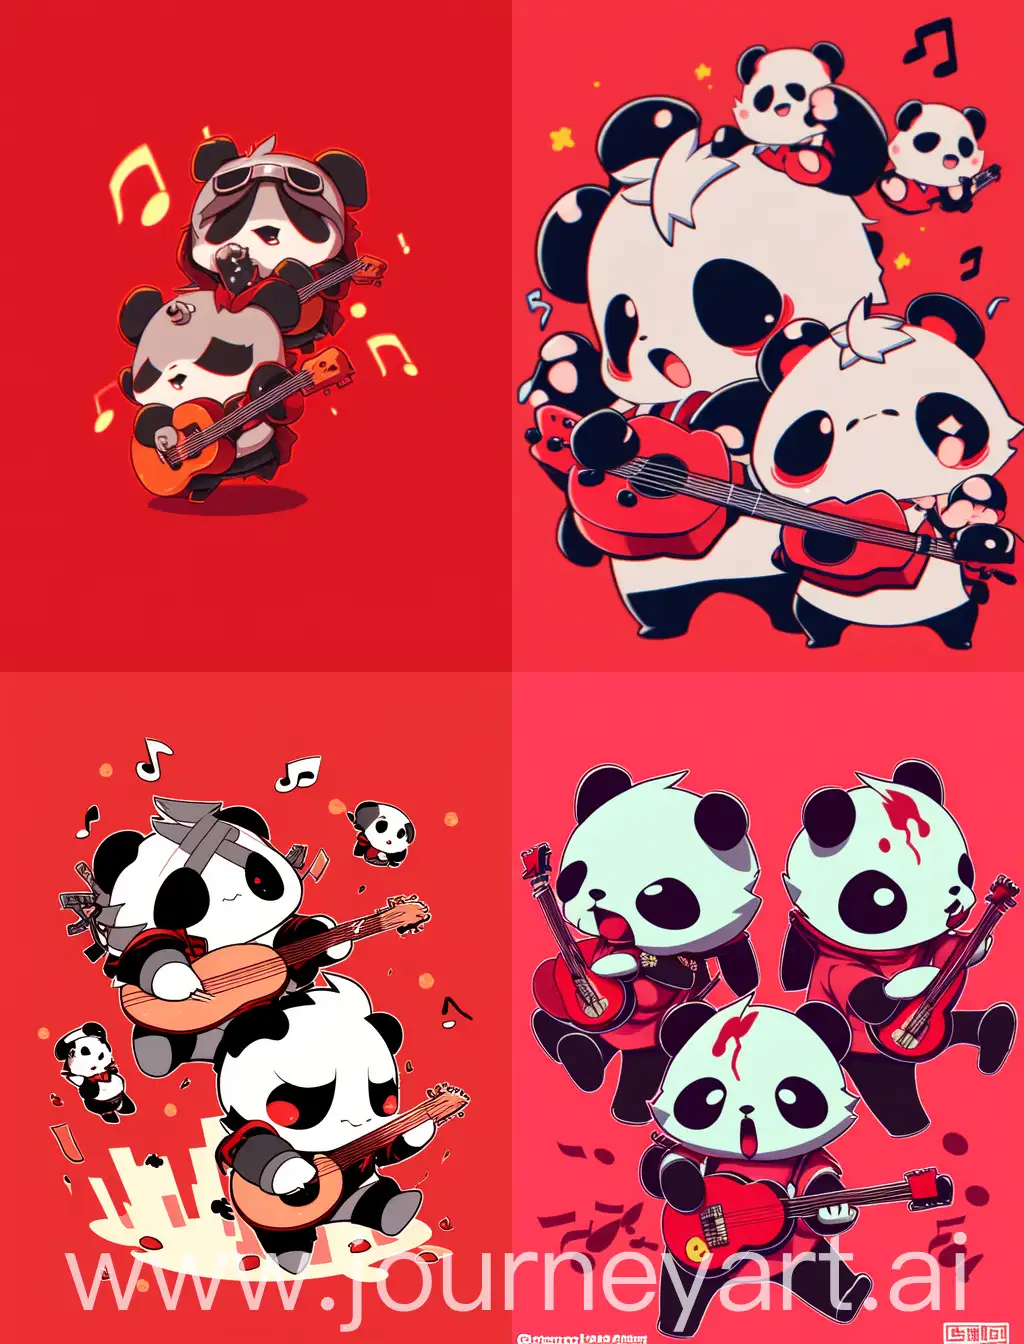 chibi pandas playing guitar, with red solid background, strong lines